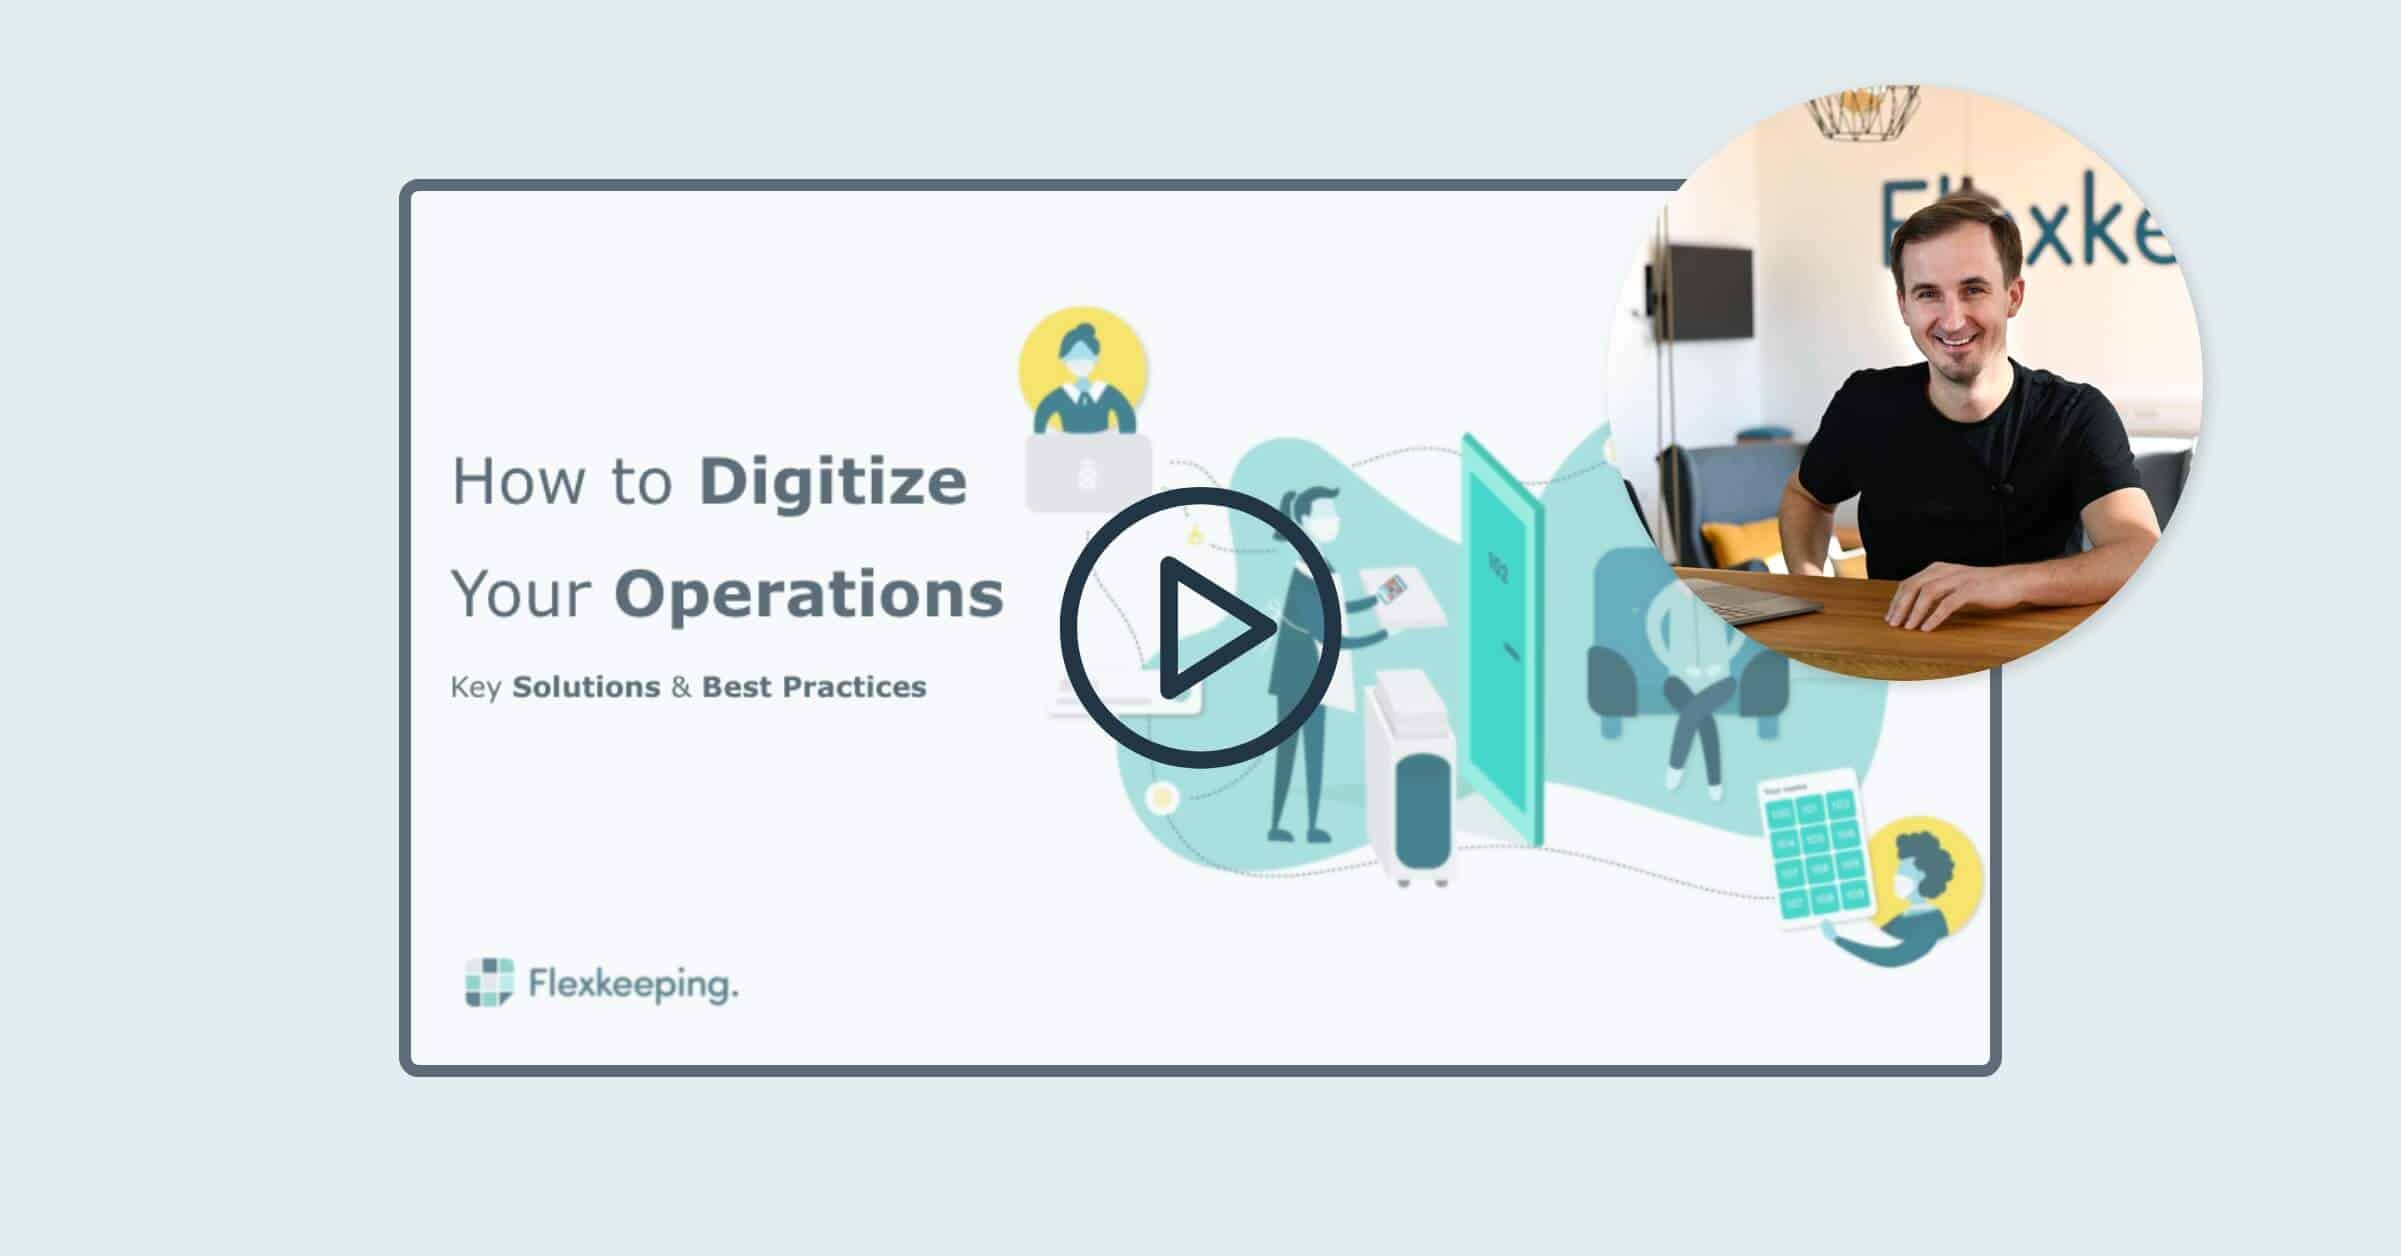 Our Thoughts on Digitizing Hotel Operations in 2021